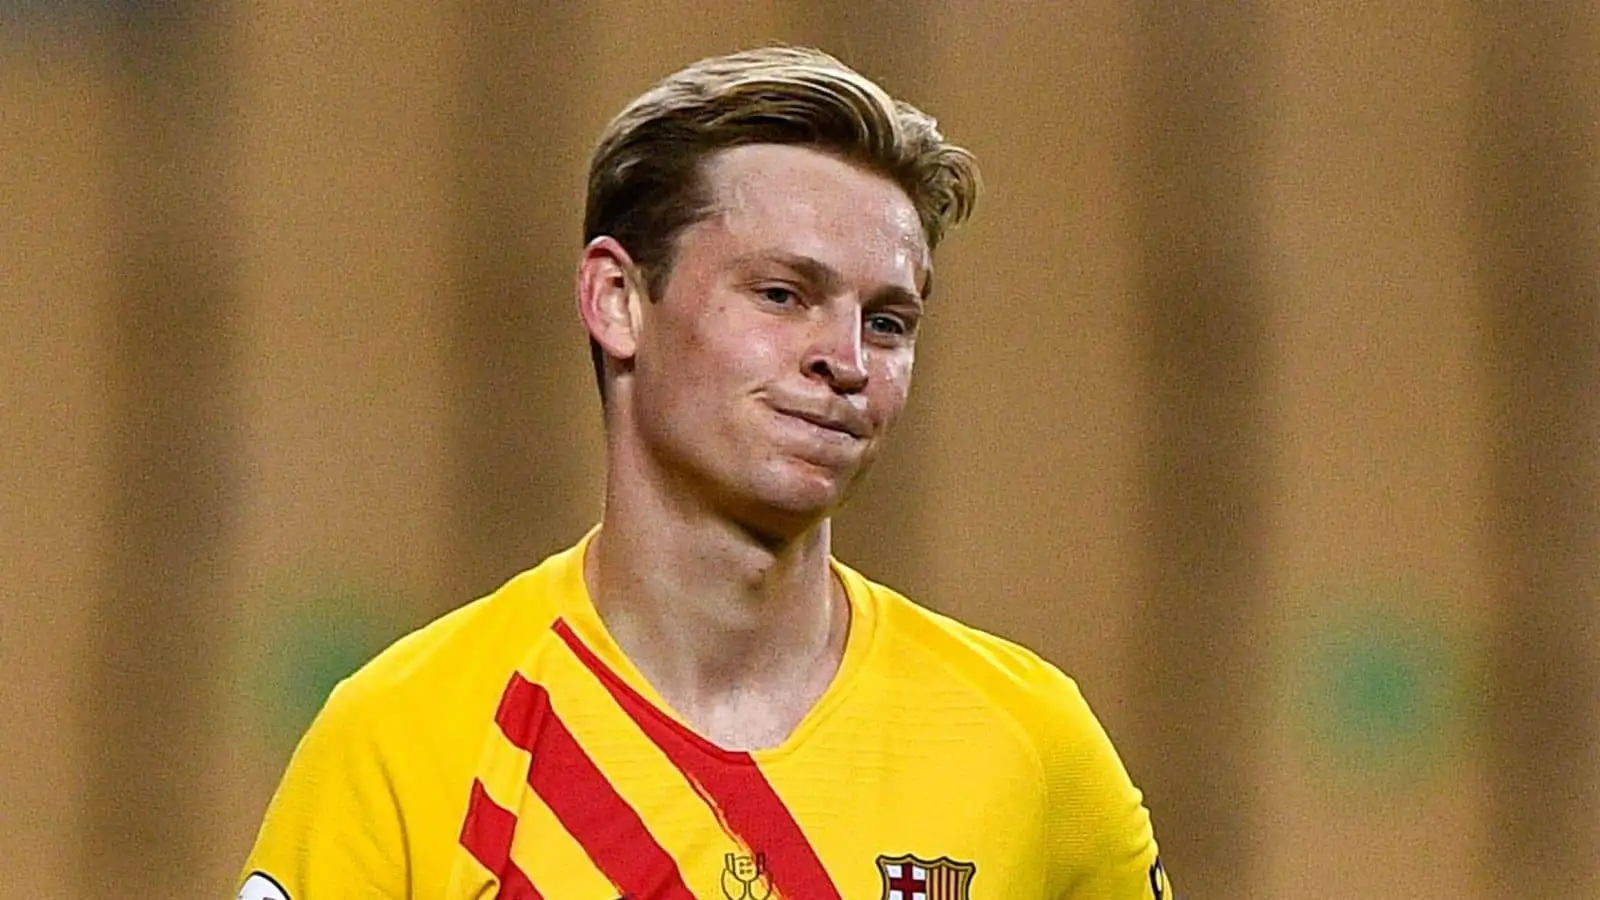 Frenkie de Jong of FC Barcelona during the Copa del Rey Final match between Athletic Club and FC Barcelona